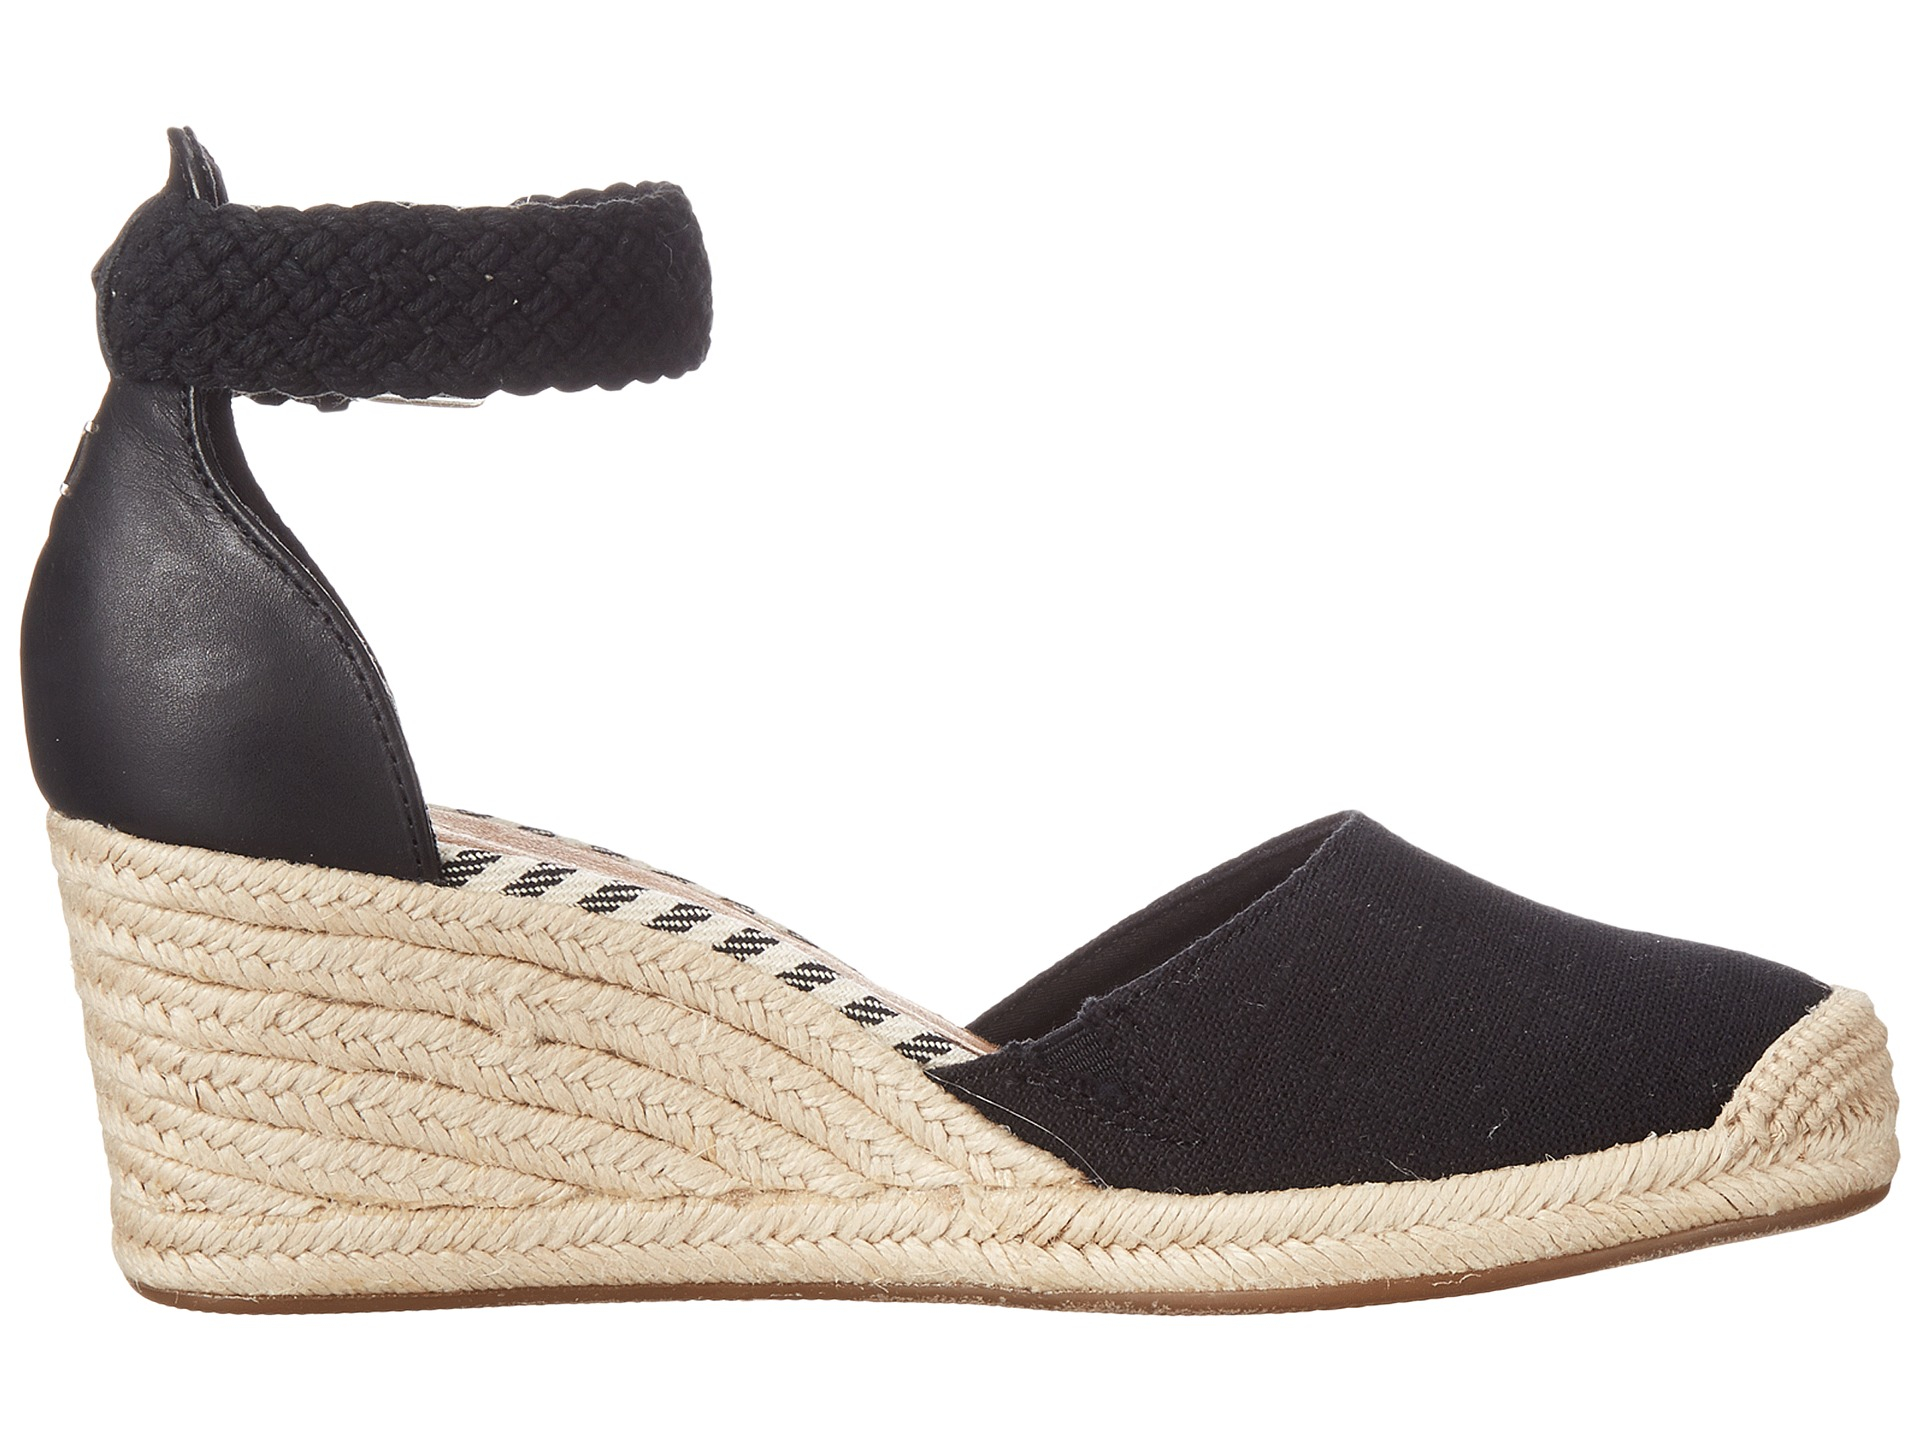 Sperry Top-Sider Valencia Canvas in 